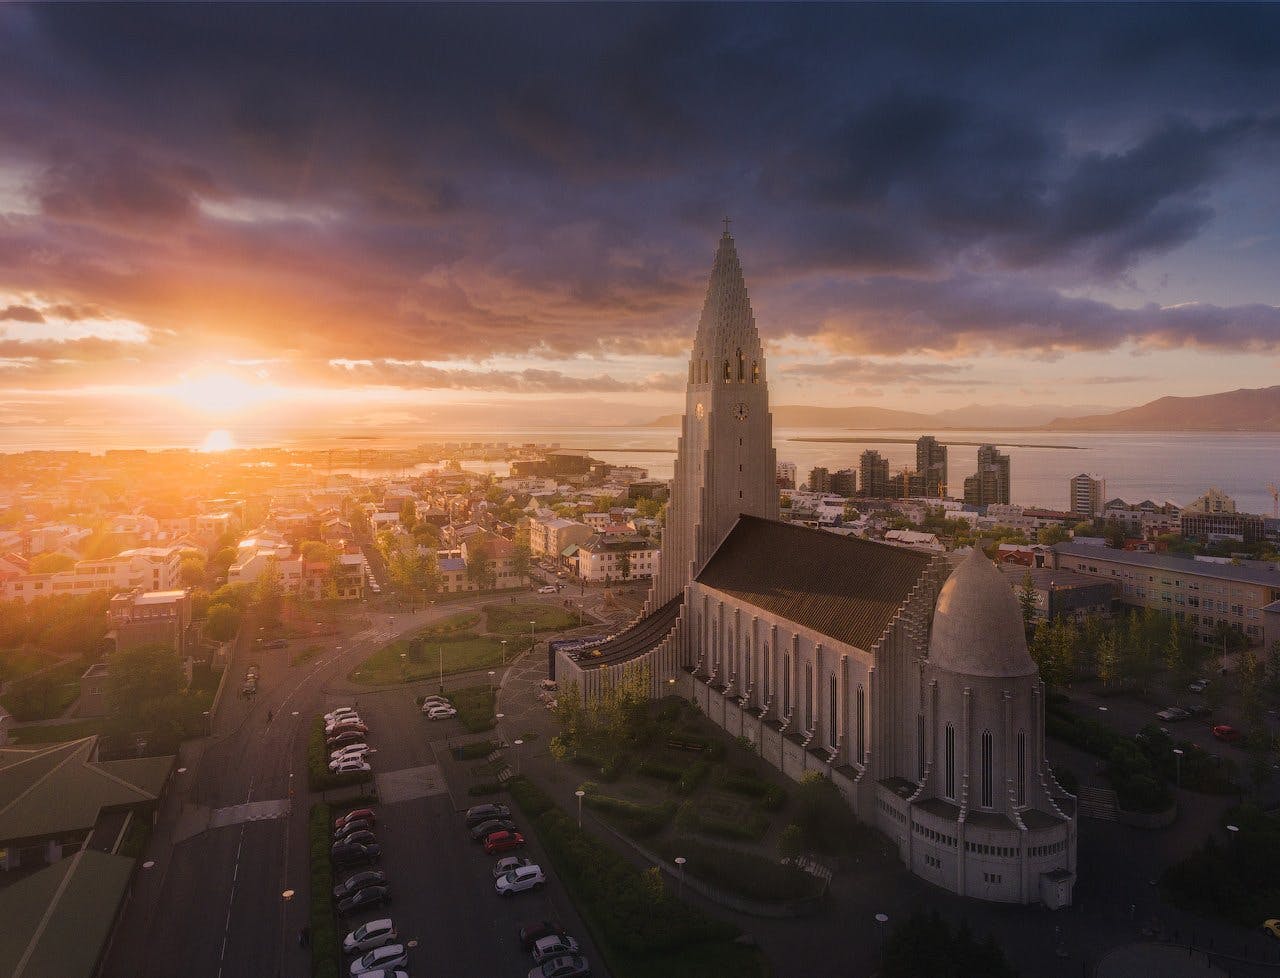 An aerial view of Reykjavík reveals the beauty of the city under the midnight sun.